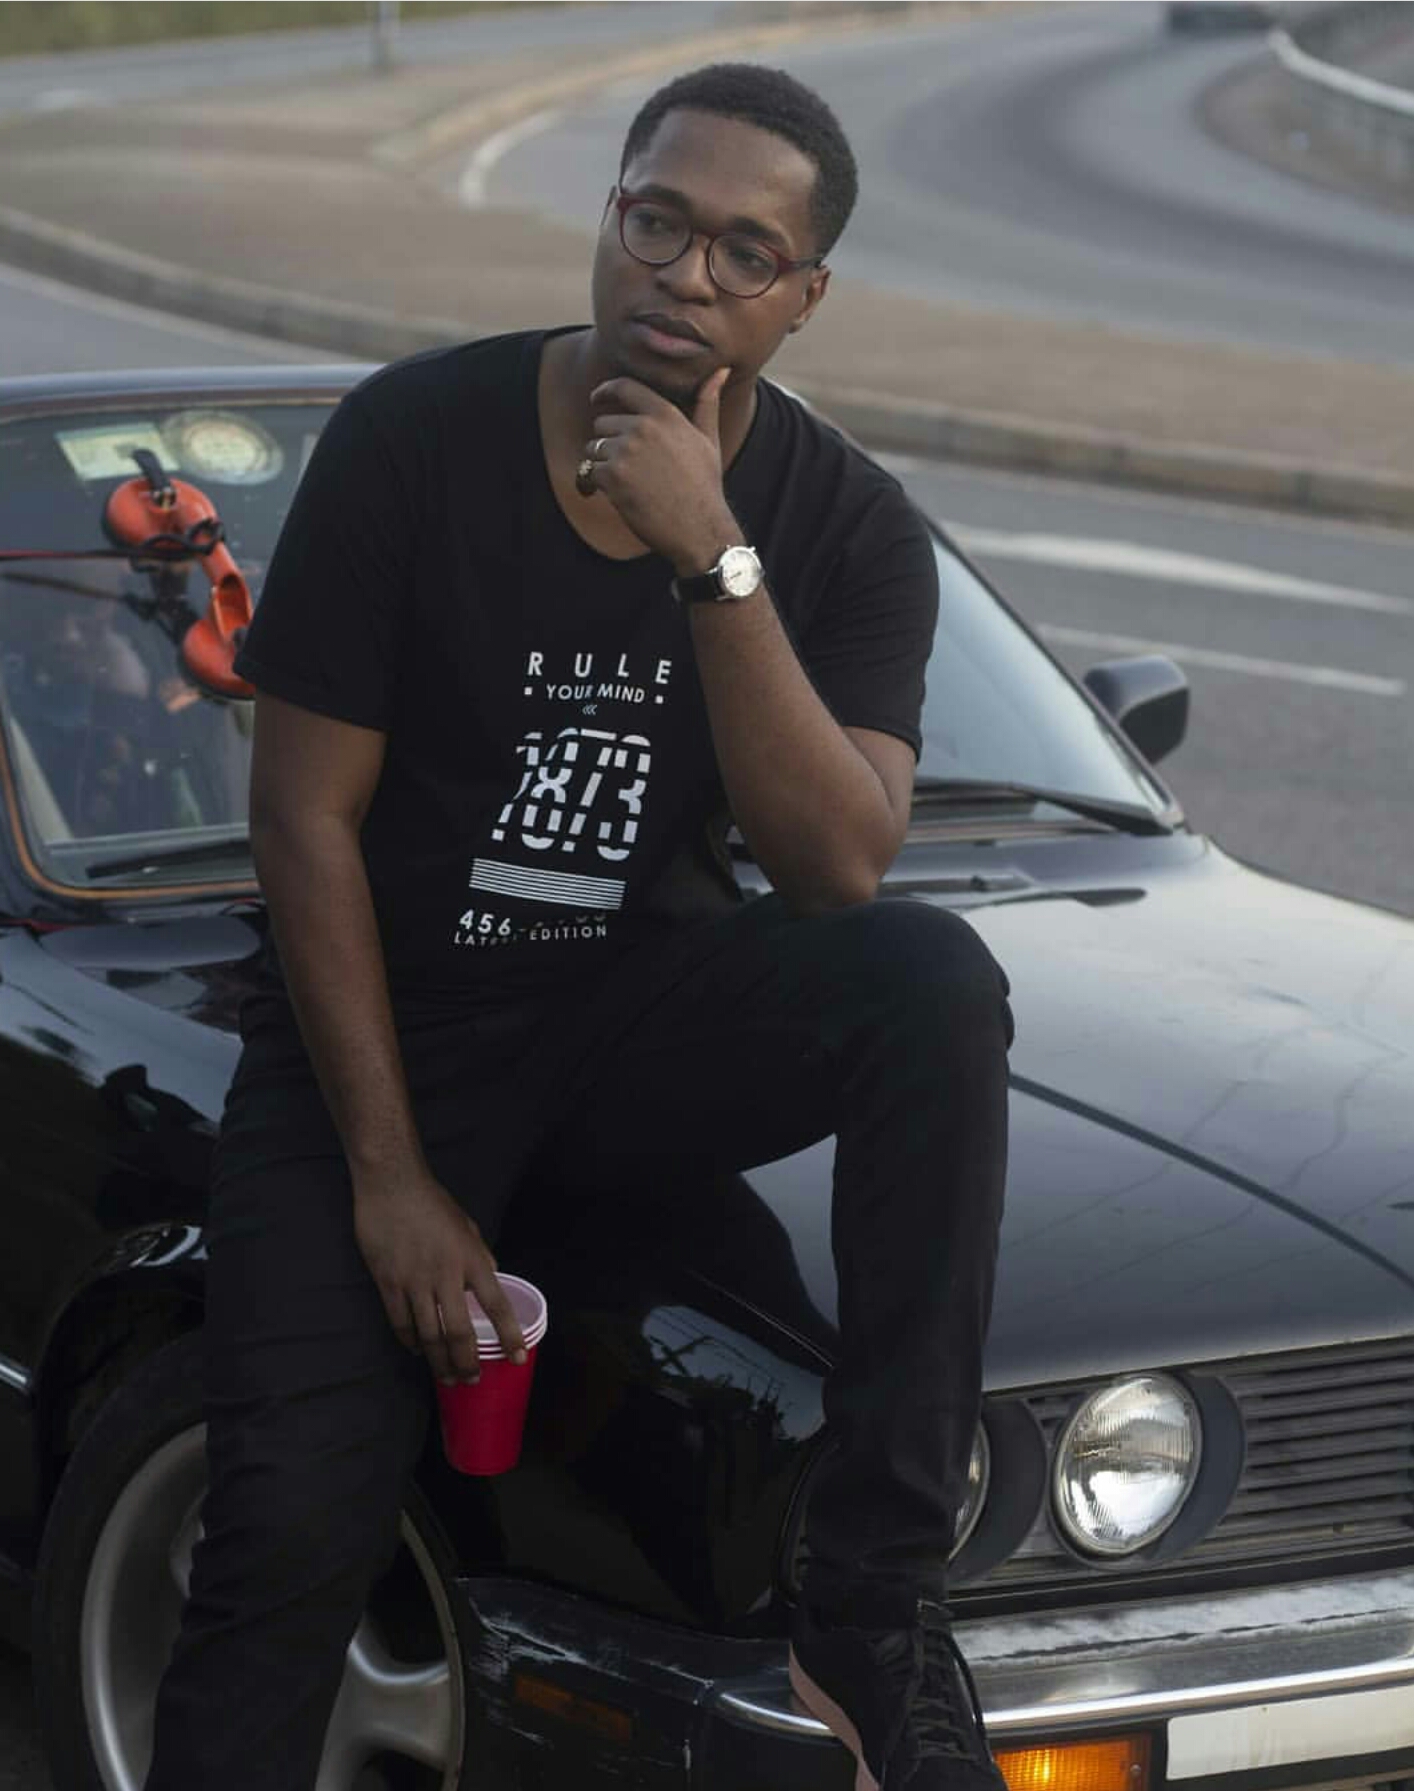 I'm not doing enough to be well recognized - Ko-Jo Cue